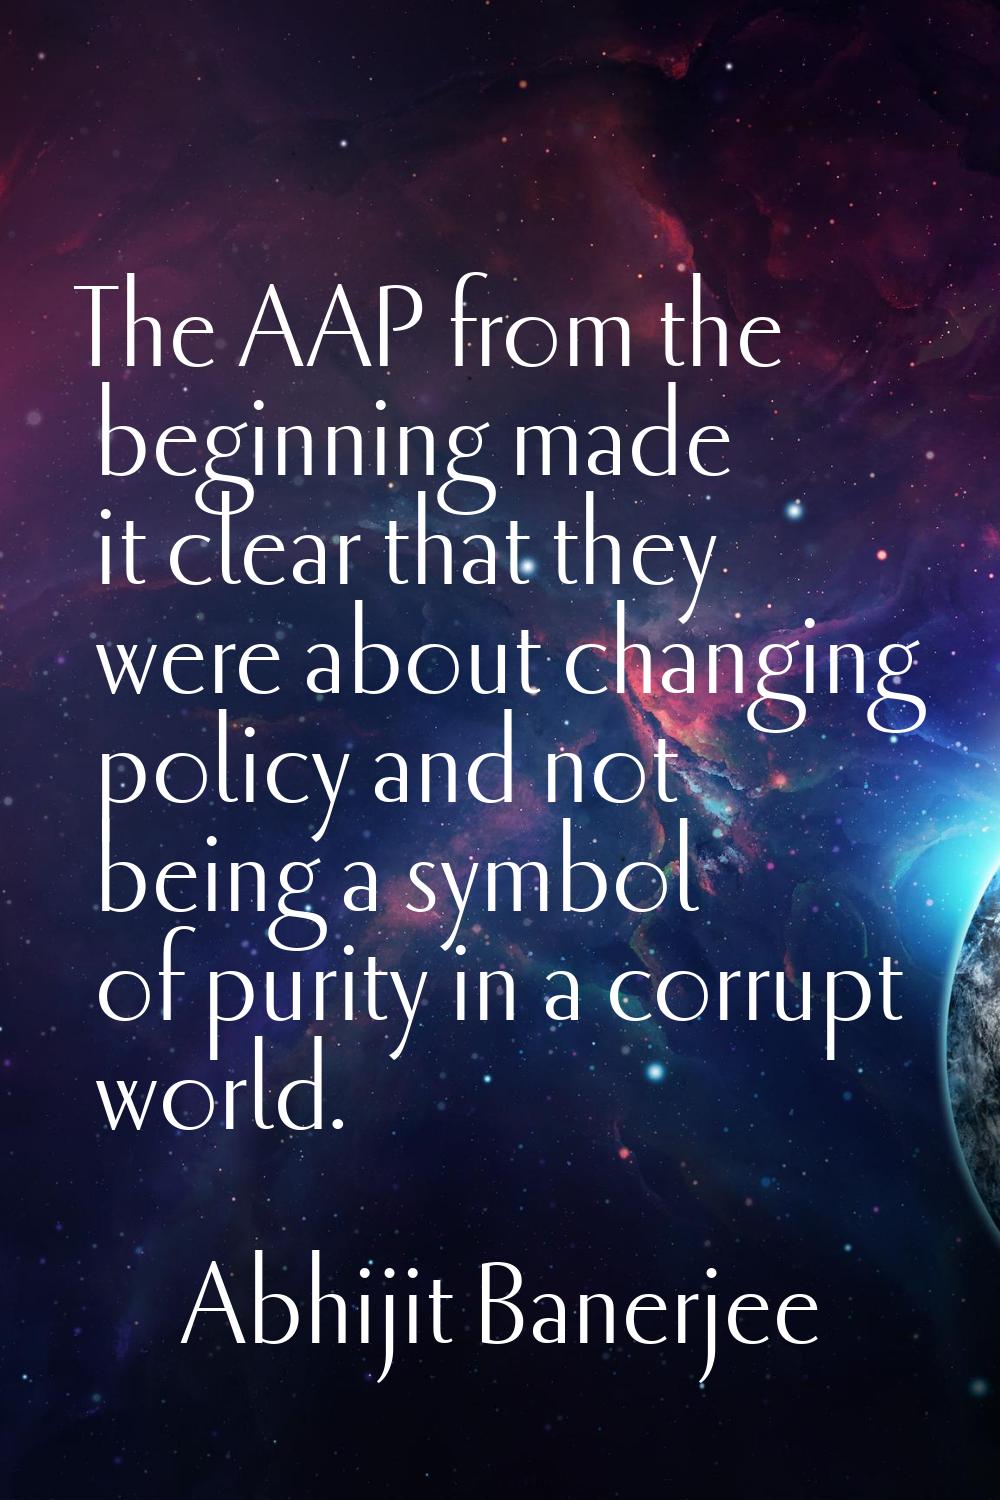 The AAP from the beginning made it clear that they were about changing policy and not being a symbo